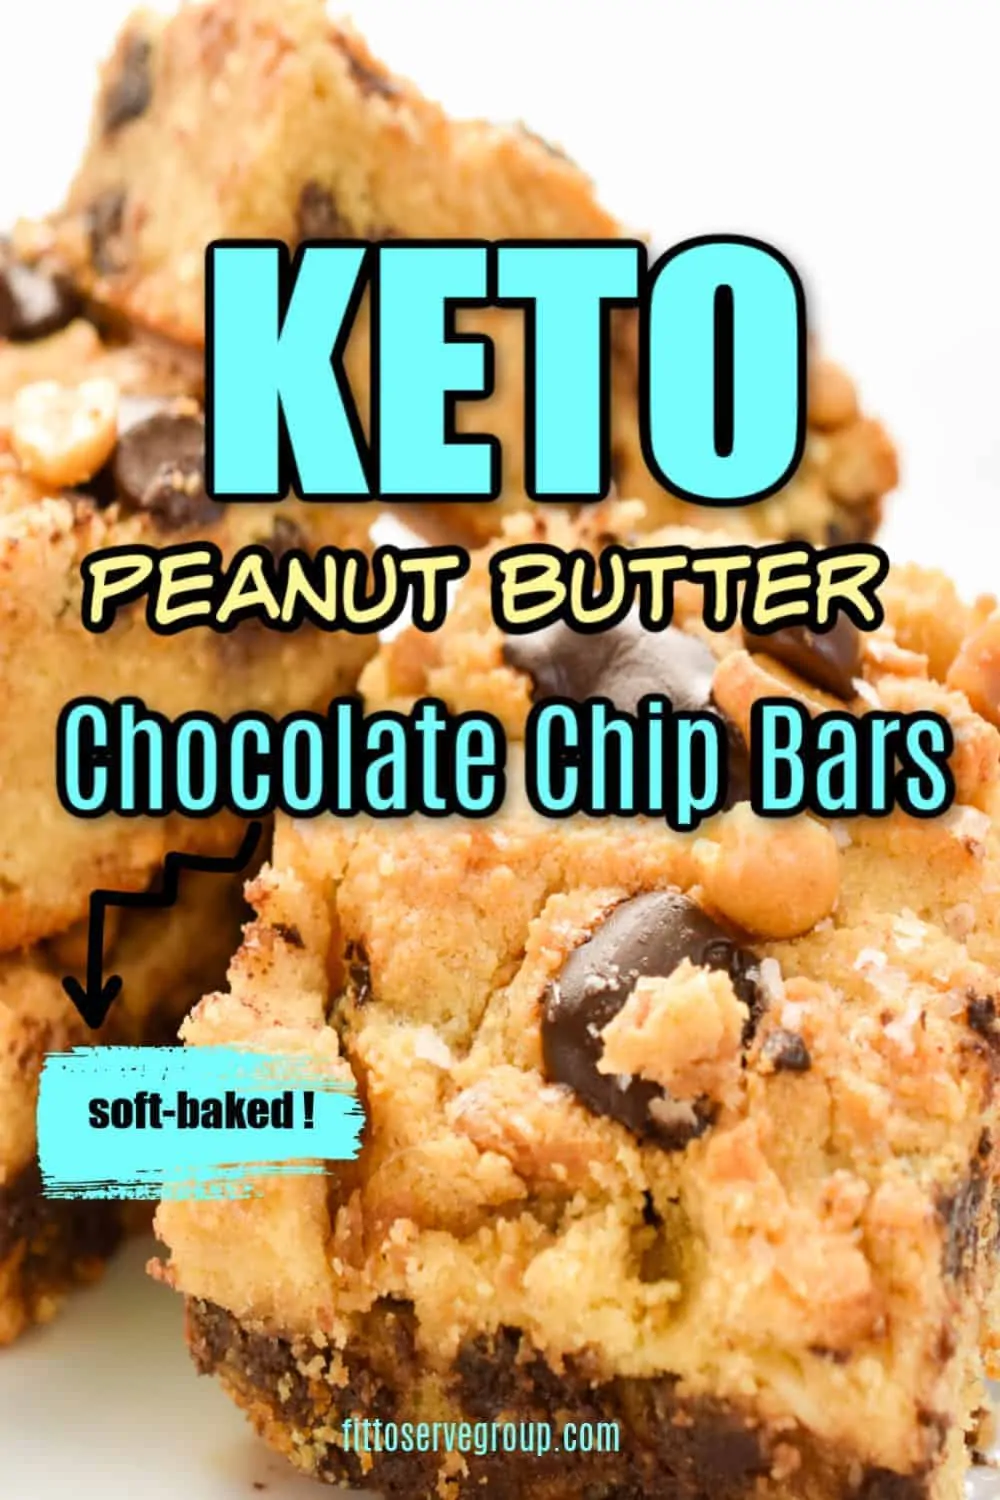 Keto Peanut Butter Chocolate Chip Bars soft baked